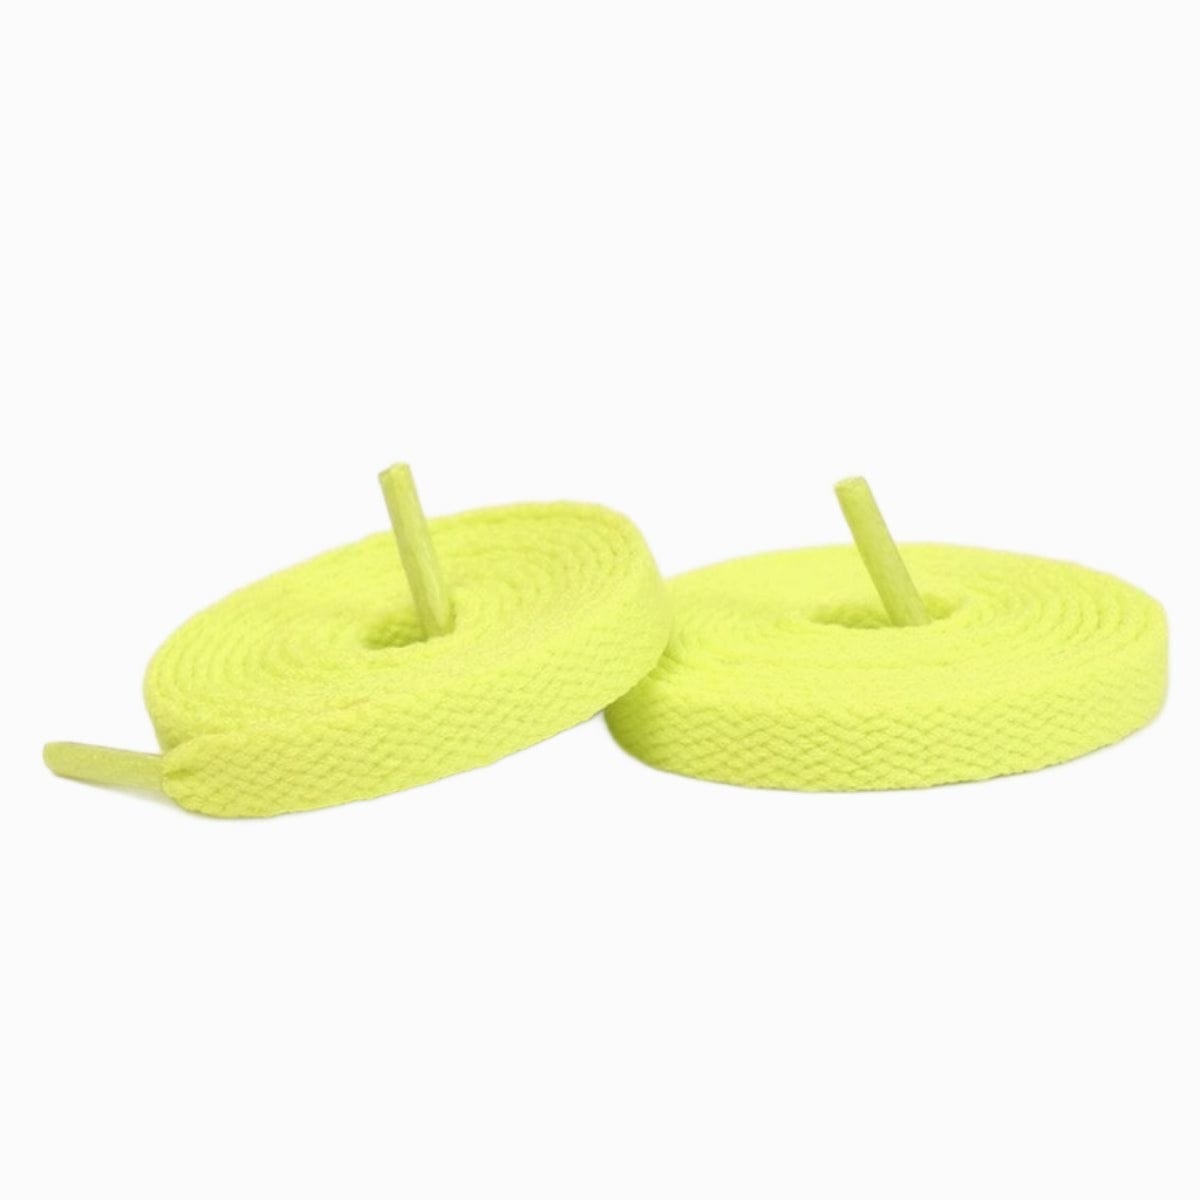 Fluorescent Yellow Replacement Shoe Laces for Adidas Handball Spezial Sneakers by Kicks Shoelaces